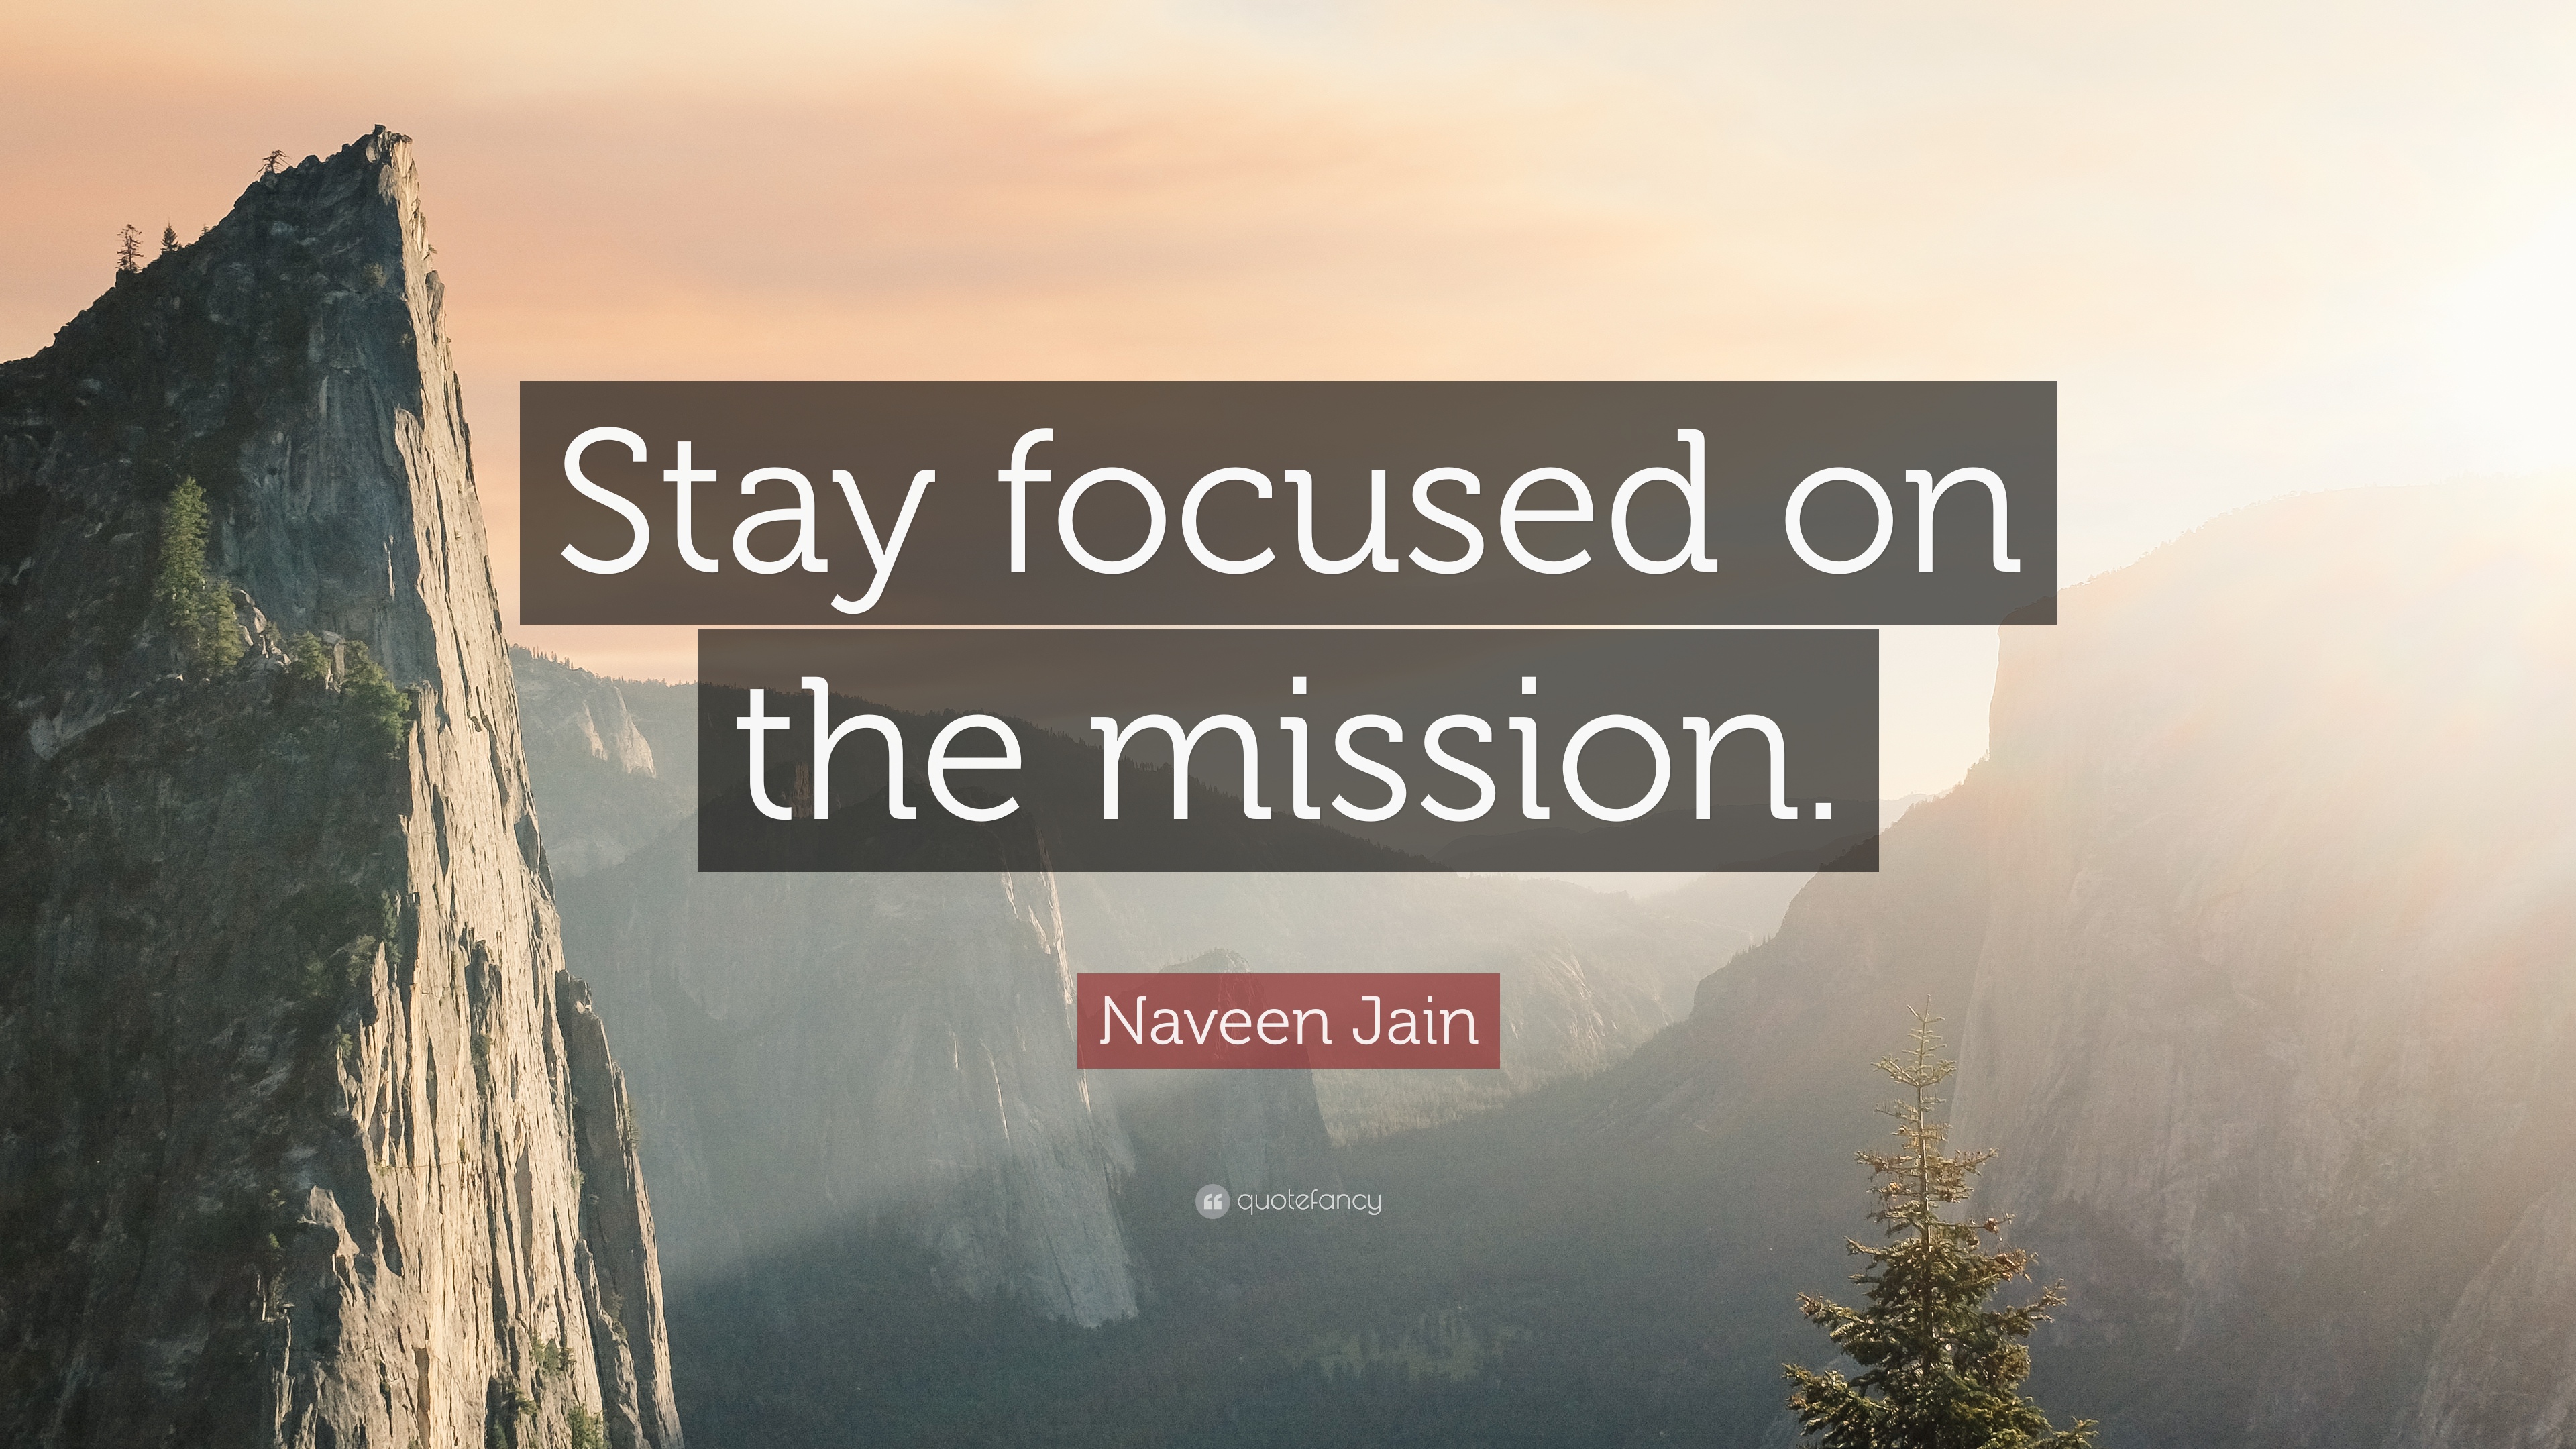 Naveen Jain Quote: “Stay focused on the mission.” (12 wallpaper)